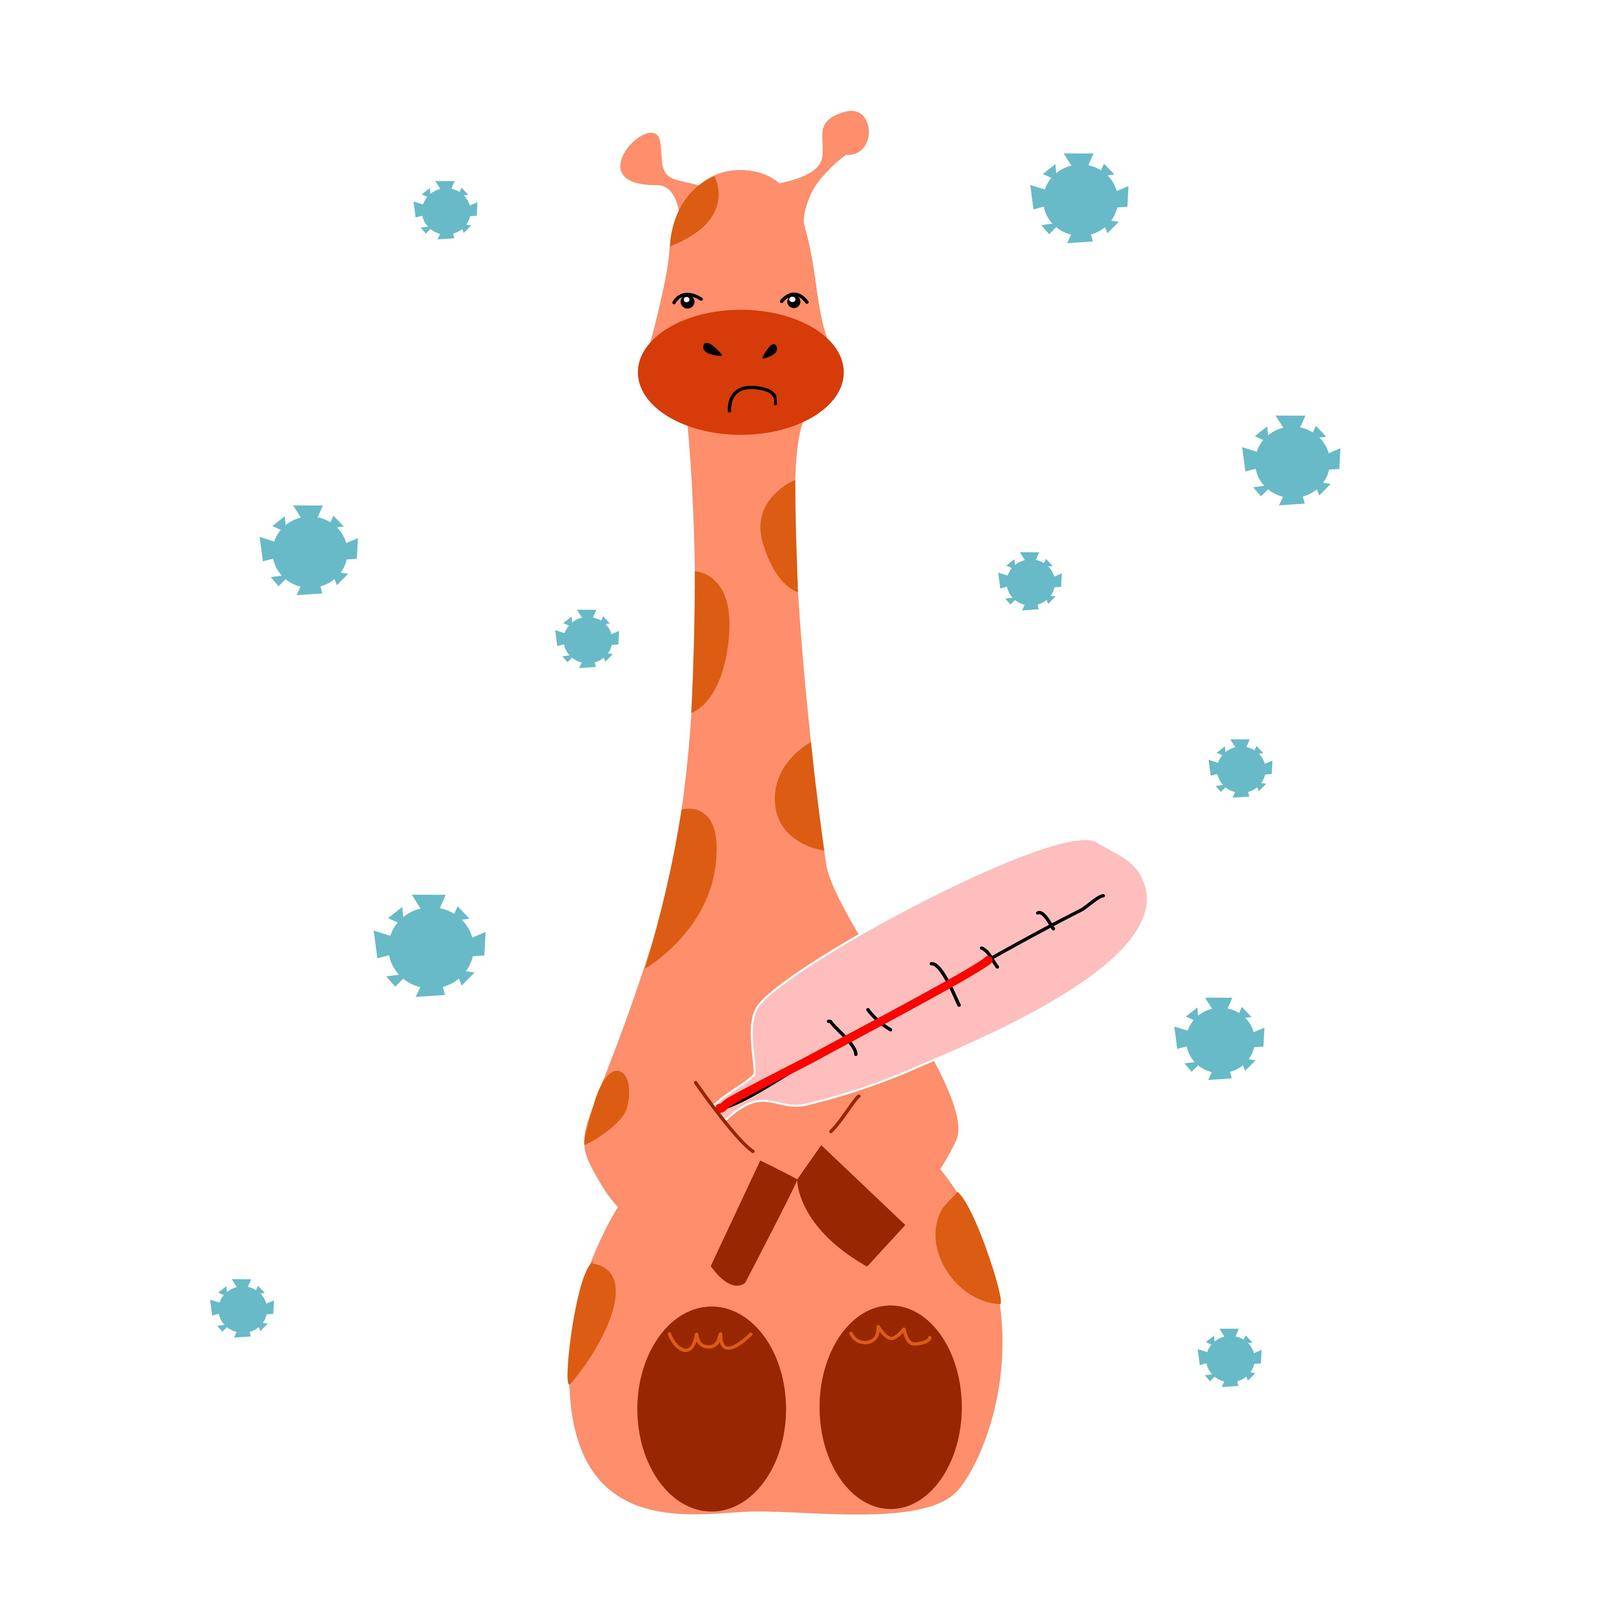 The giraffe is sick and measures the temperature with a thermometer. And there are viruses flying around.